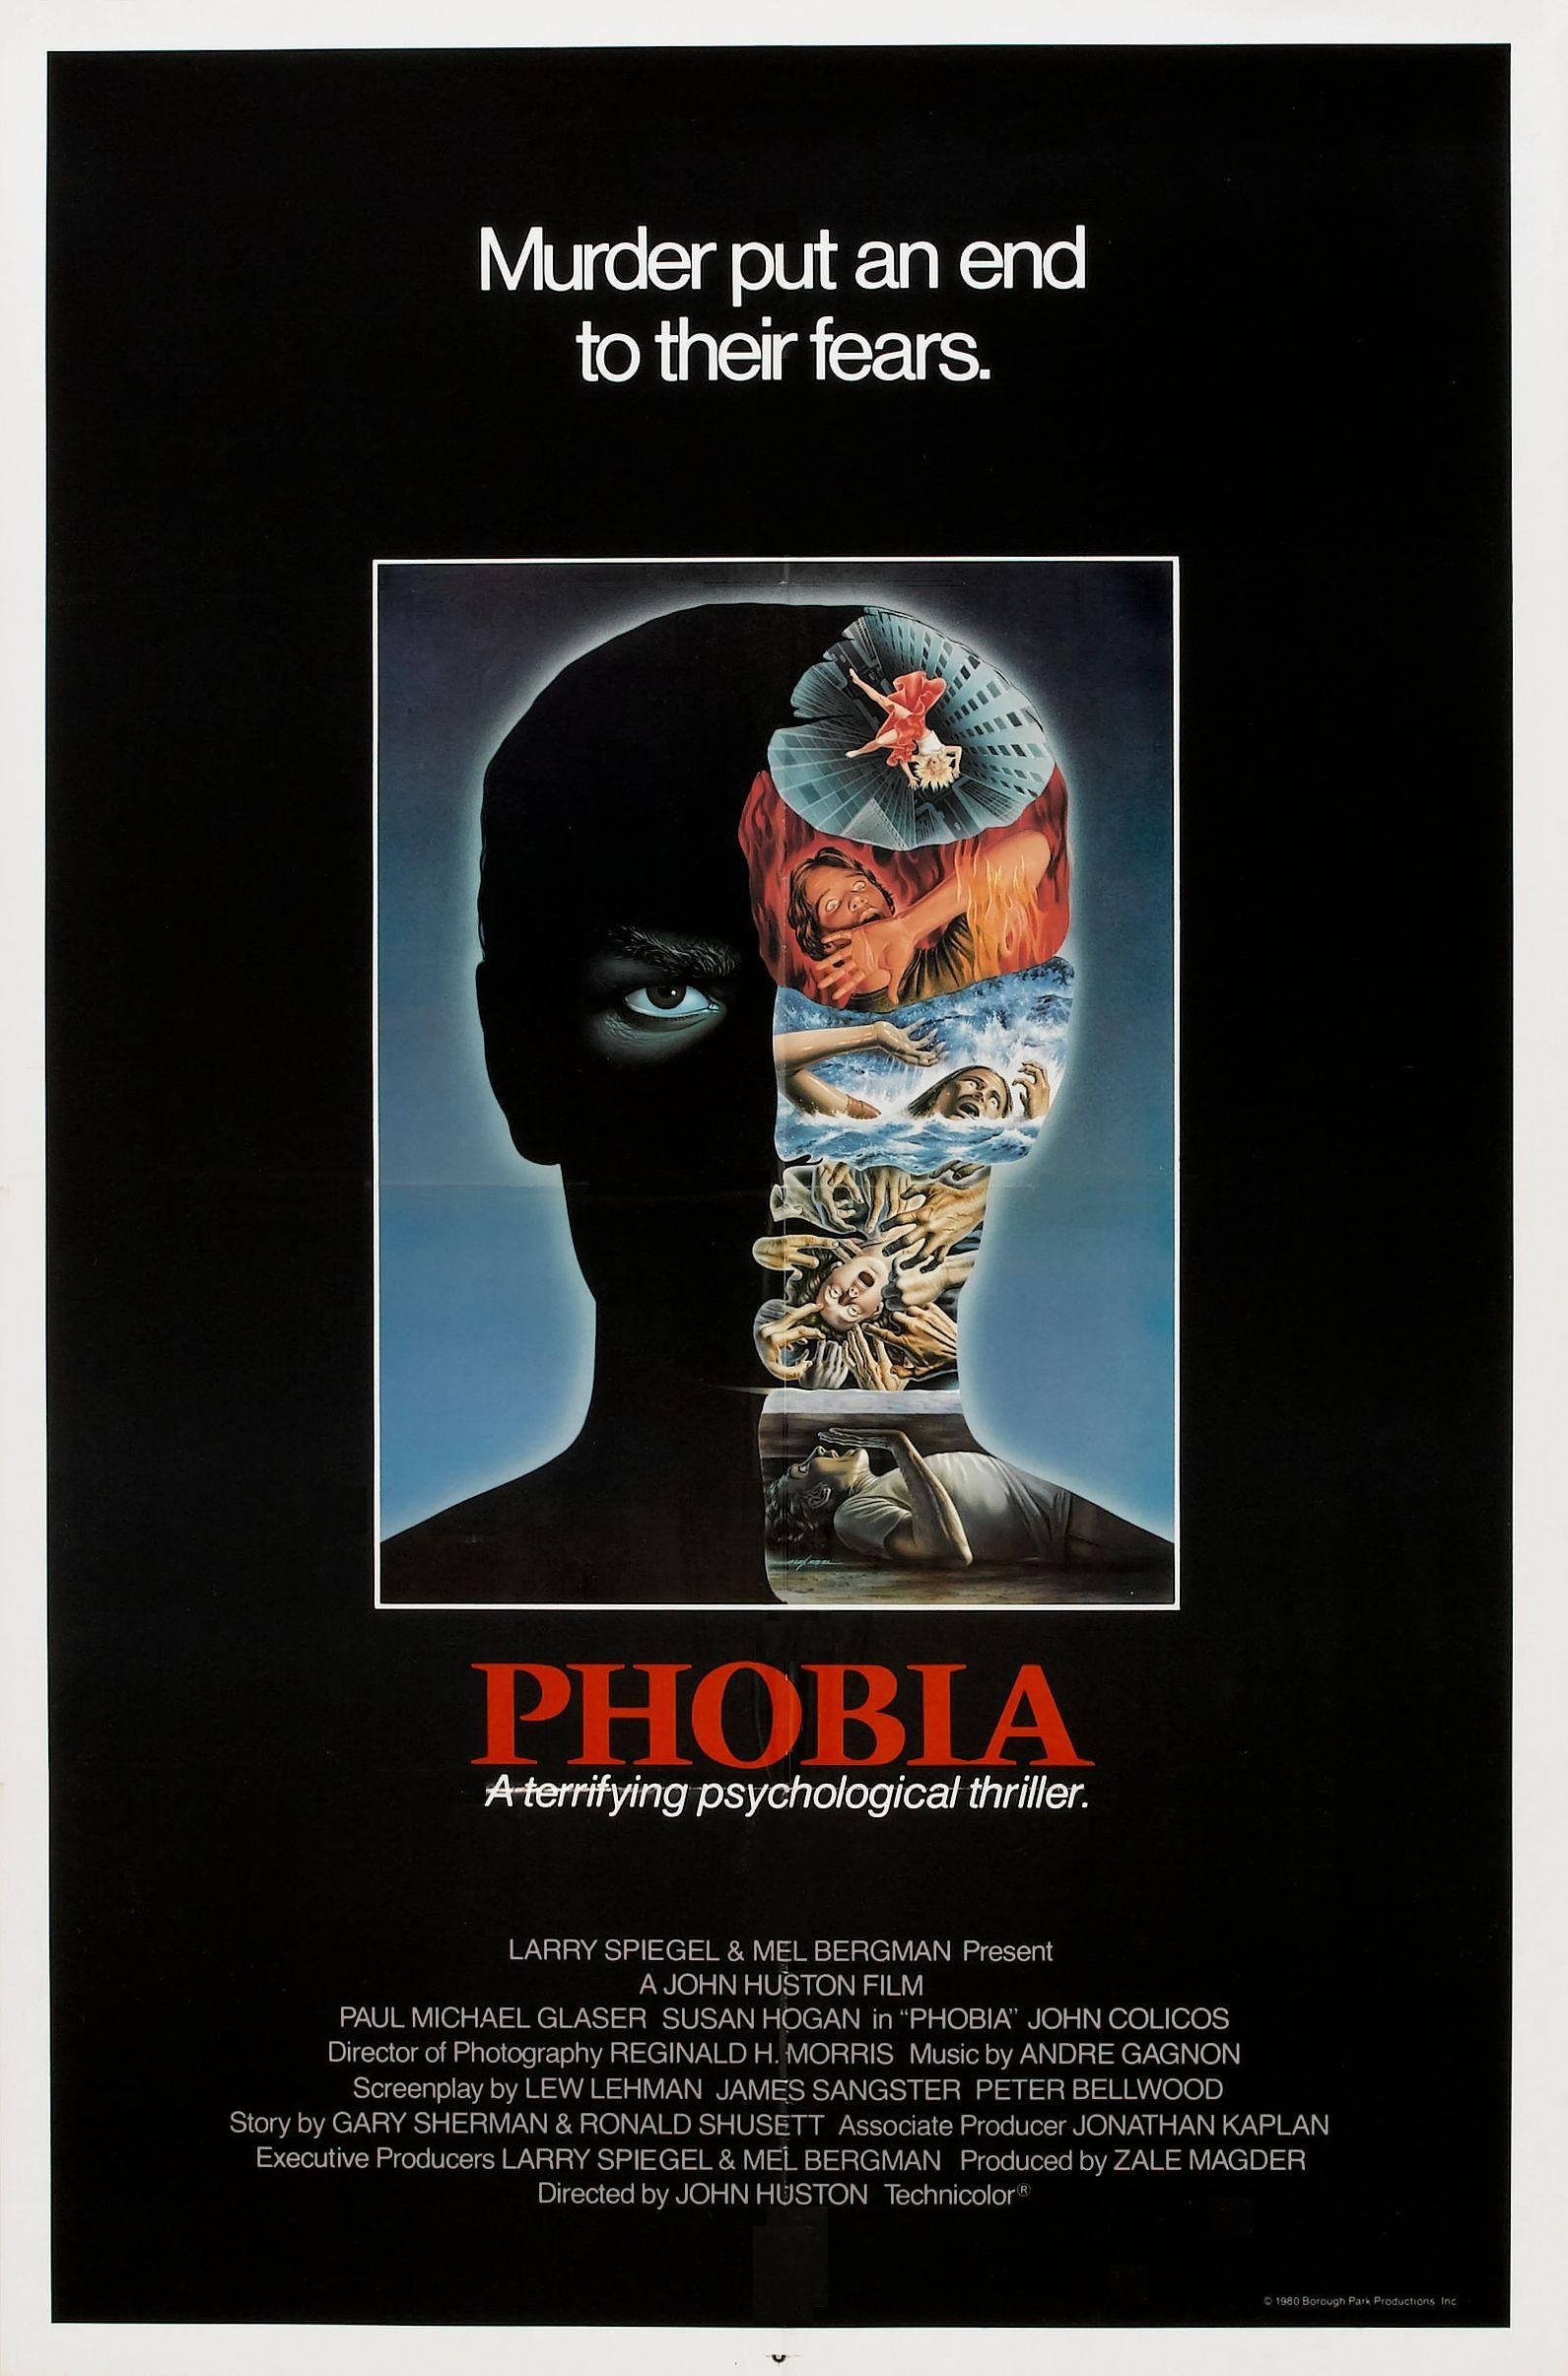 Poster of the movie Phobia: A Descent into Terror